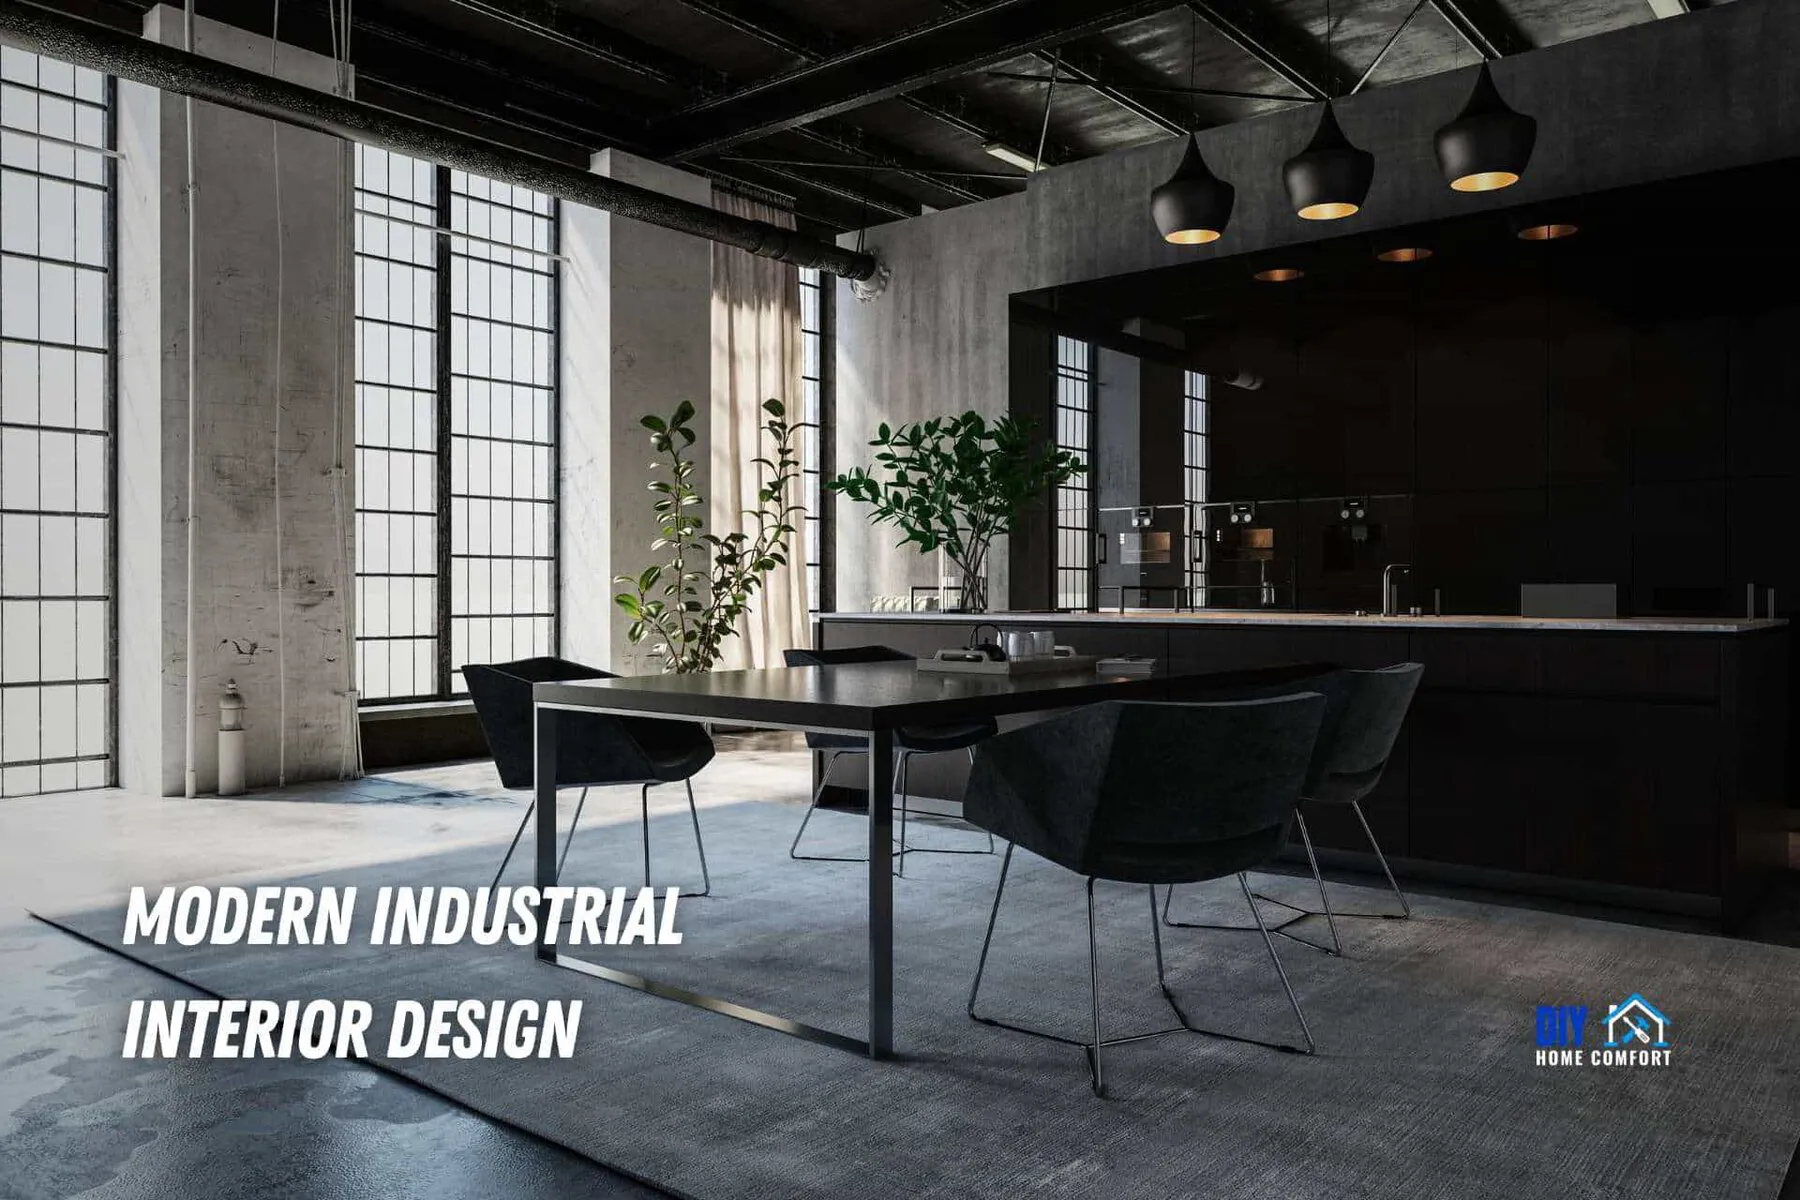 Modern Industrial Interior Design: 15 Design Ideas For That Old New Look! | DIY Home Comfort